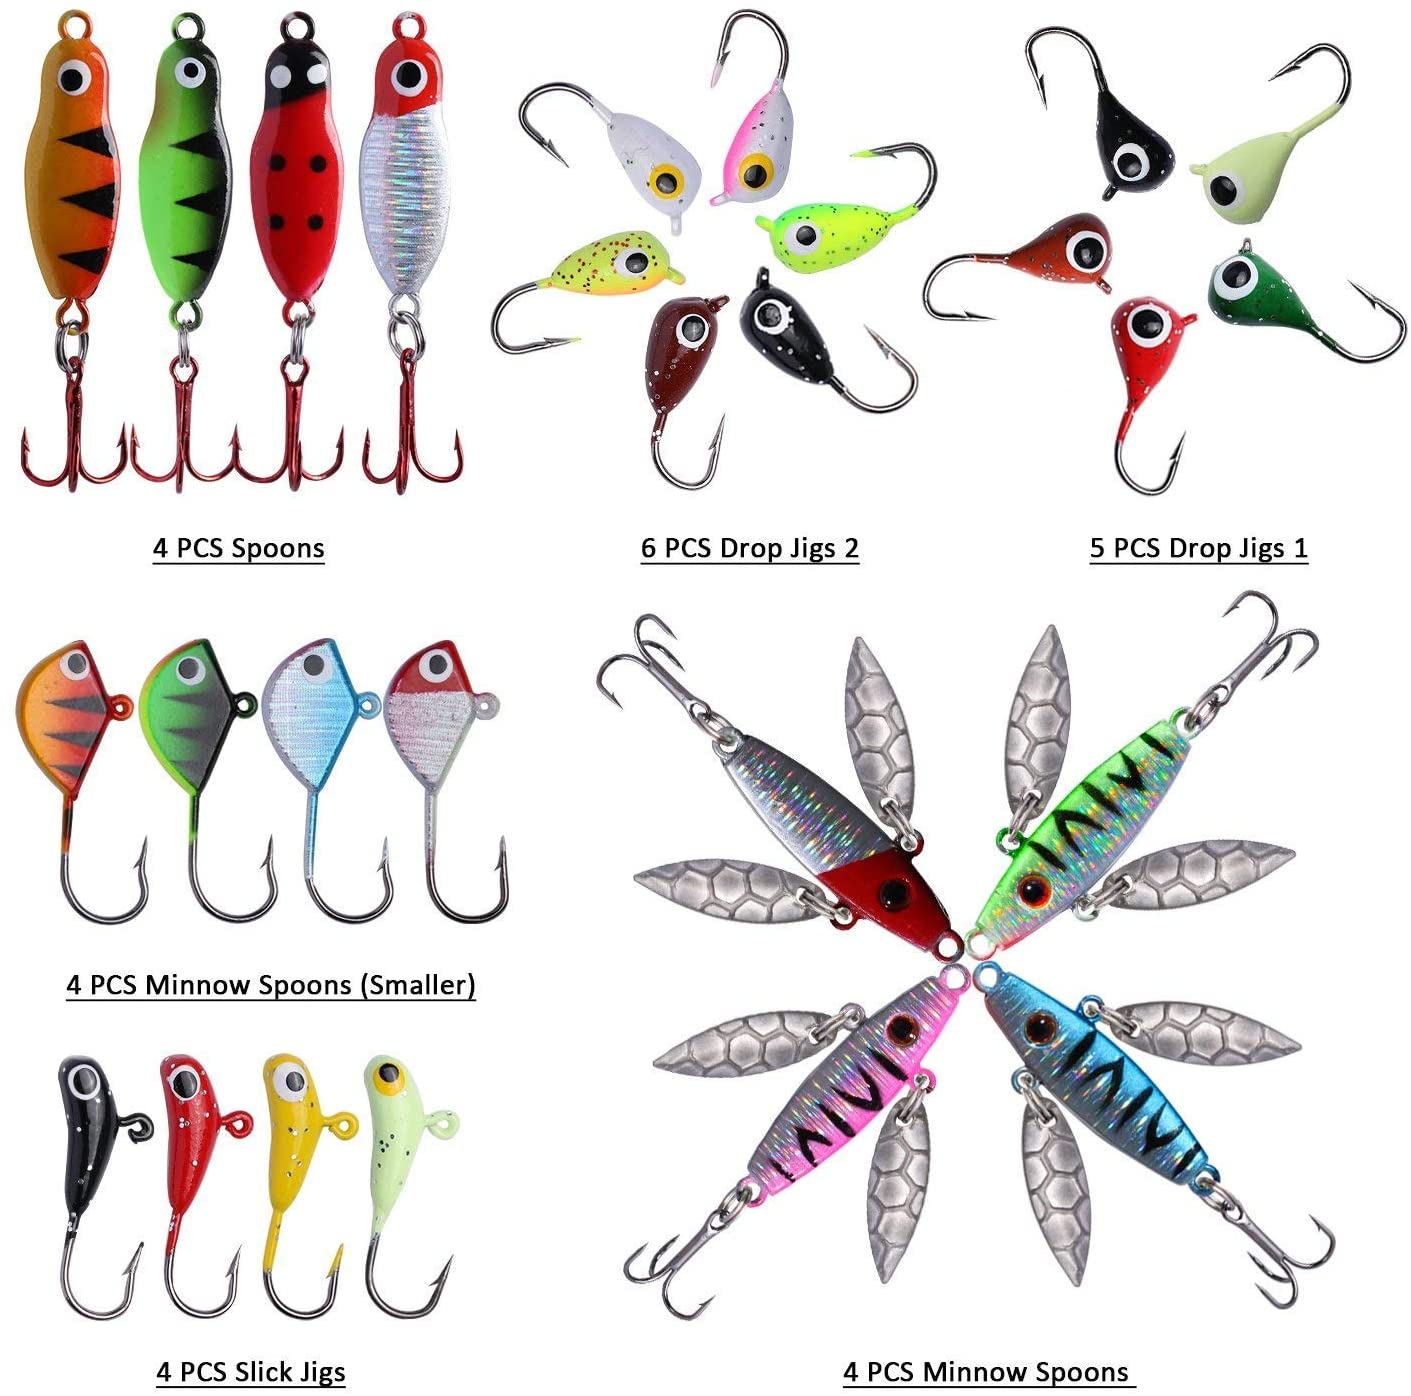  Outdoor Ice Fishing Jigs, 5 PCS Ice Fishing Hooks Lightweight  Firm for Fish Pond : Sports & Outdoors